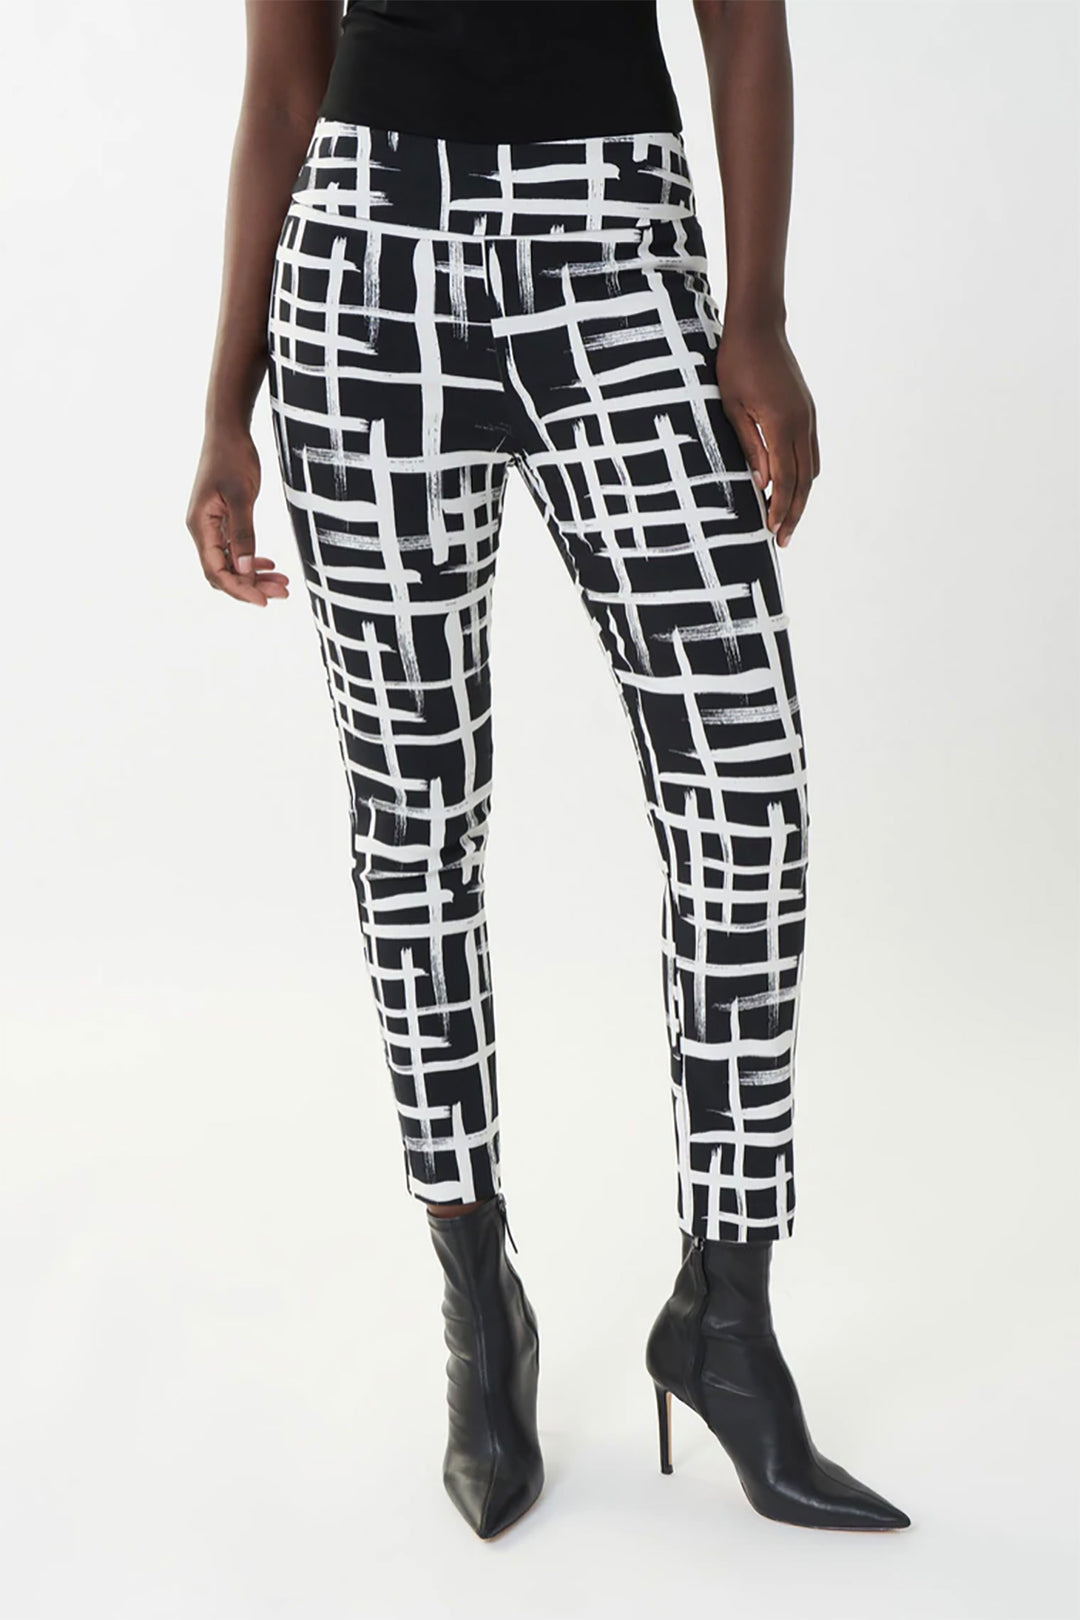 Woman wearing the block inspired pant in black & white by Joseph Ribkoff, sold and shipped from Pizazz Boutique Nelson Bay women's dresses online Australia